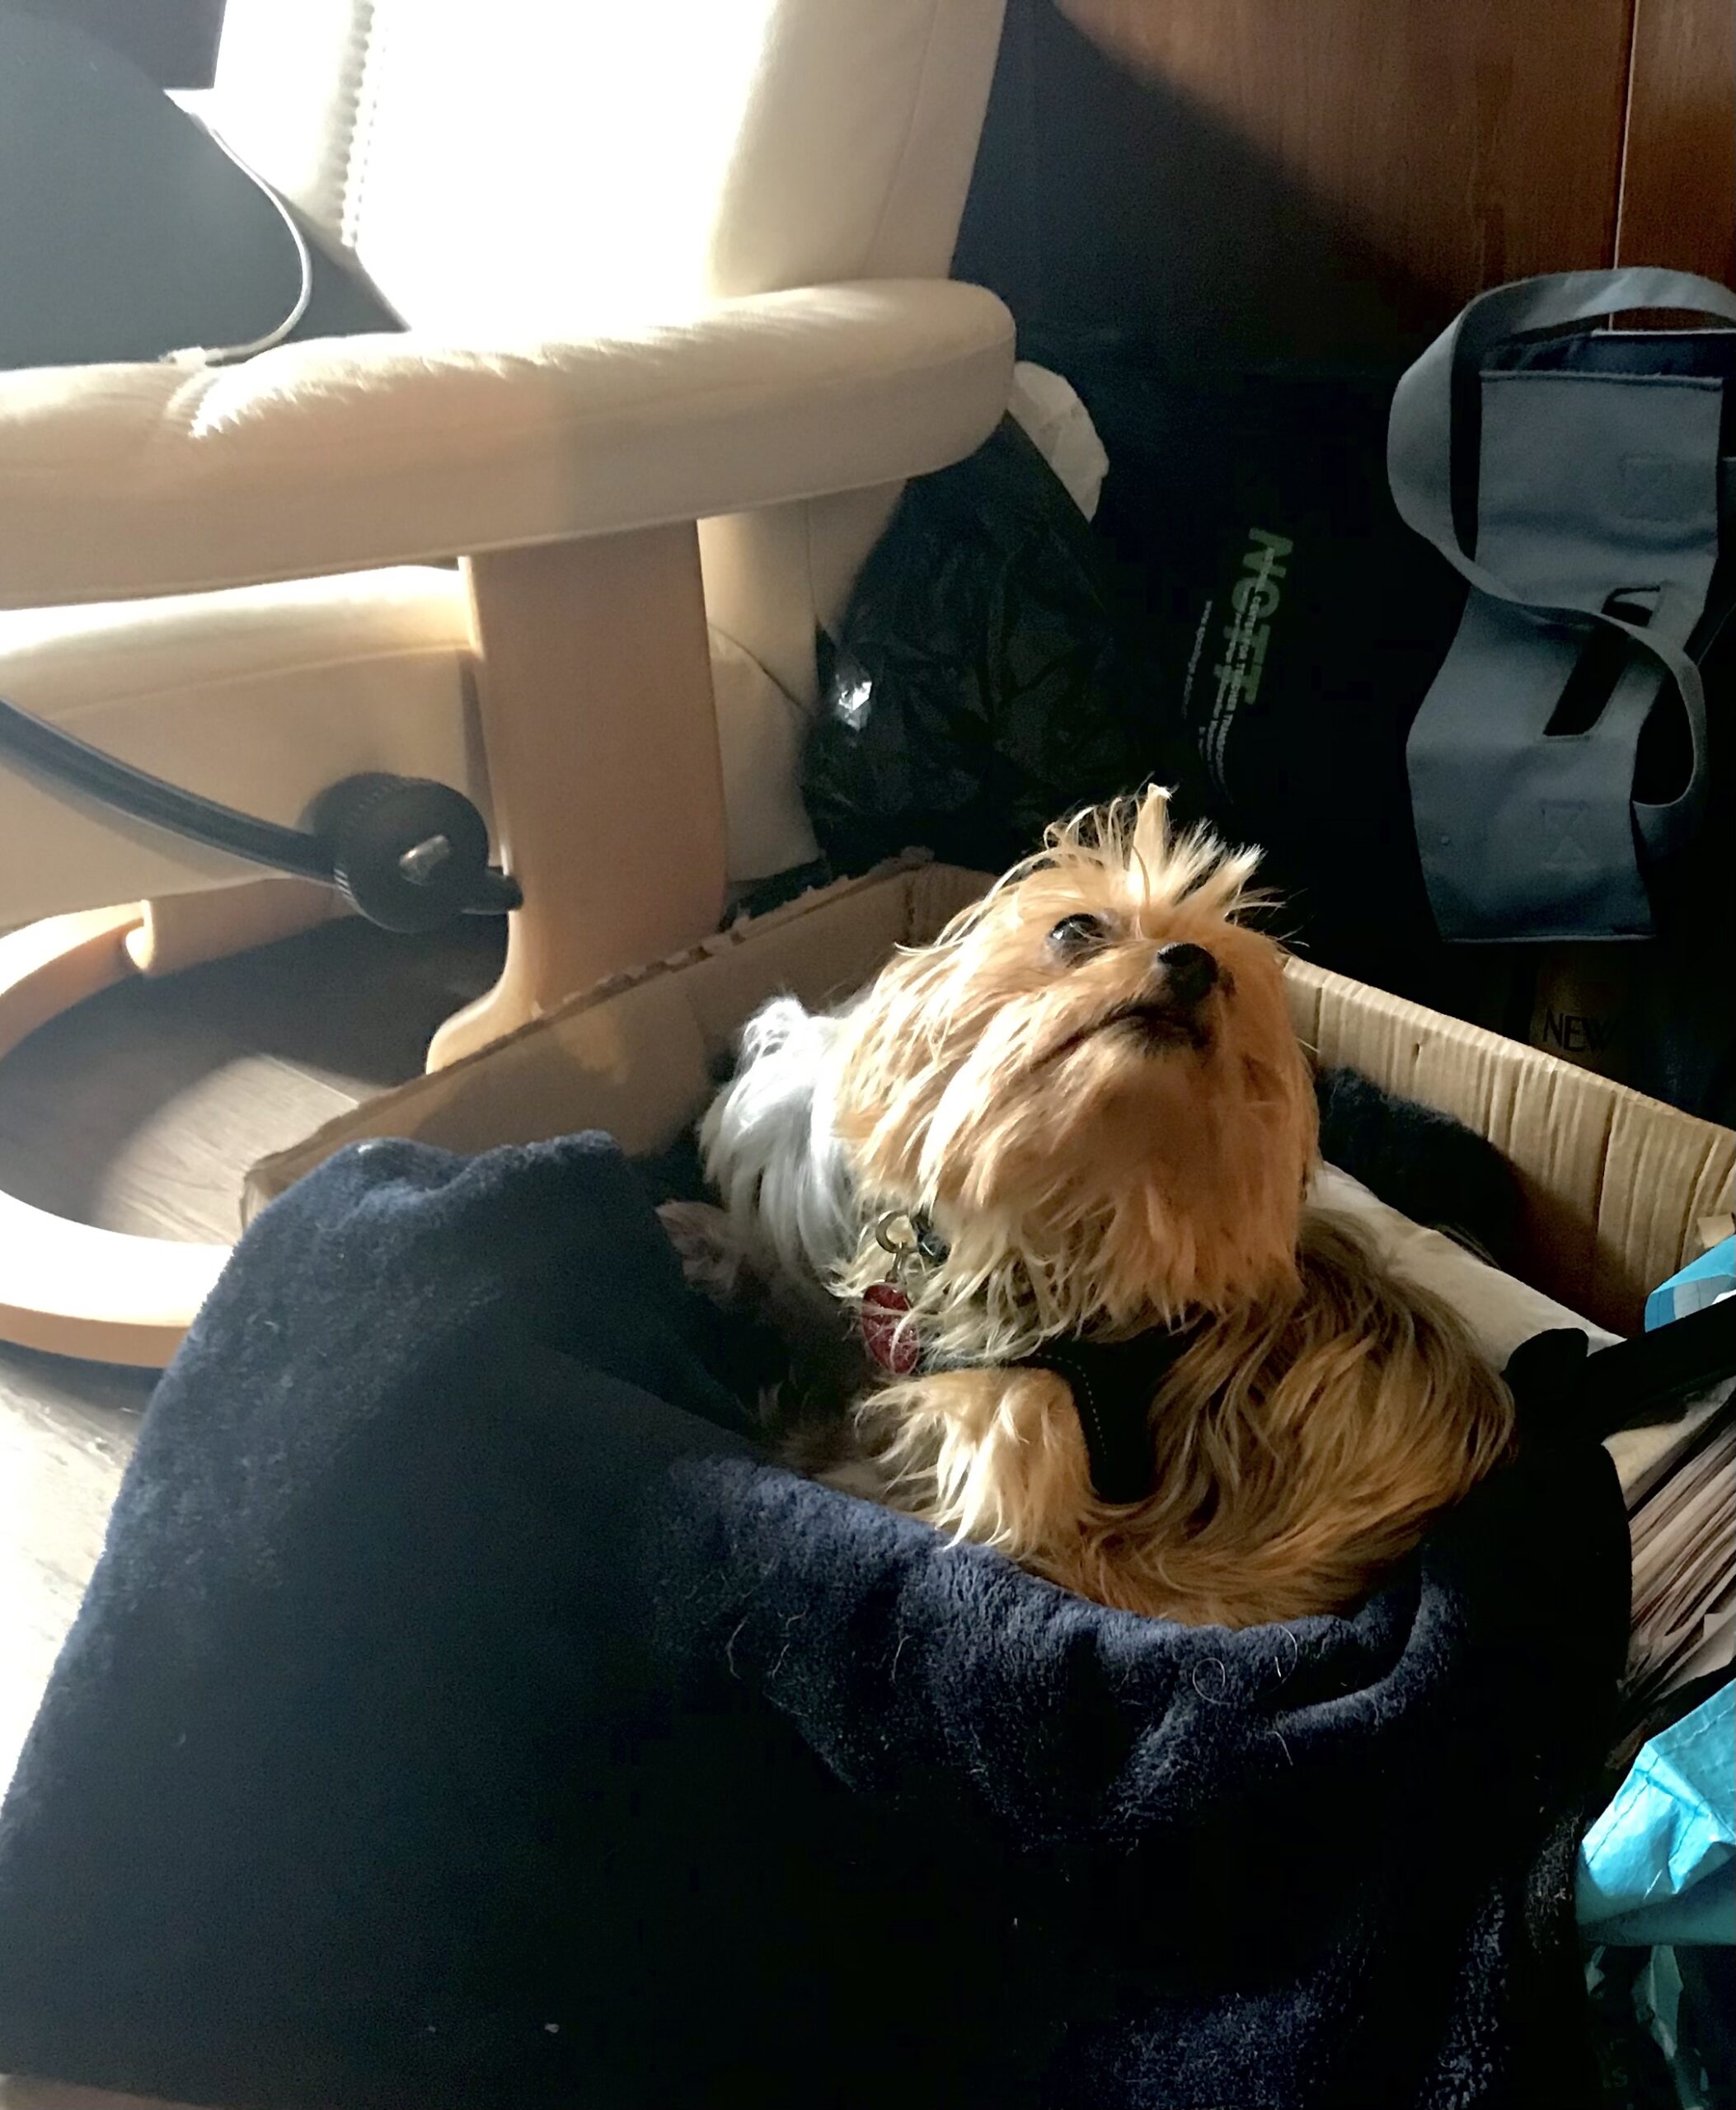 Two small dogs curled up inside a packing box, with one (a Yorkshire Terrier) looking upward so that her fringe stands out against the dark background